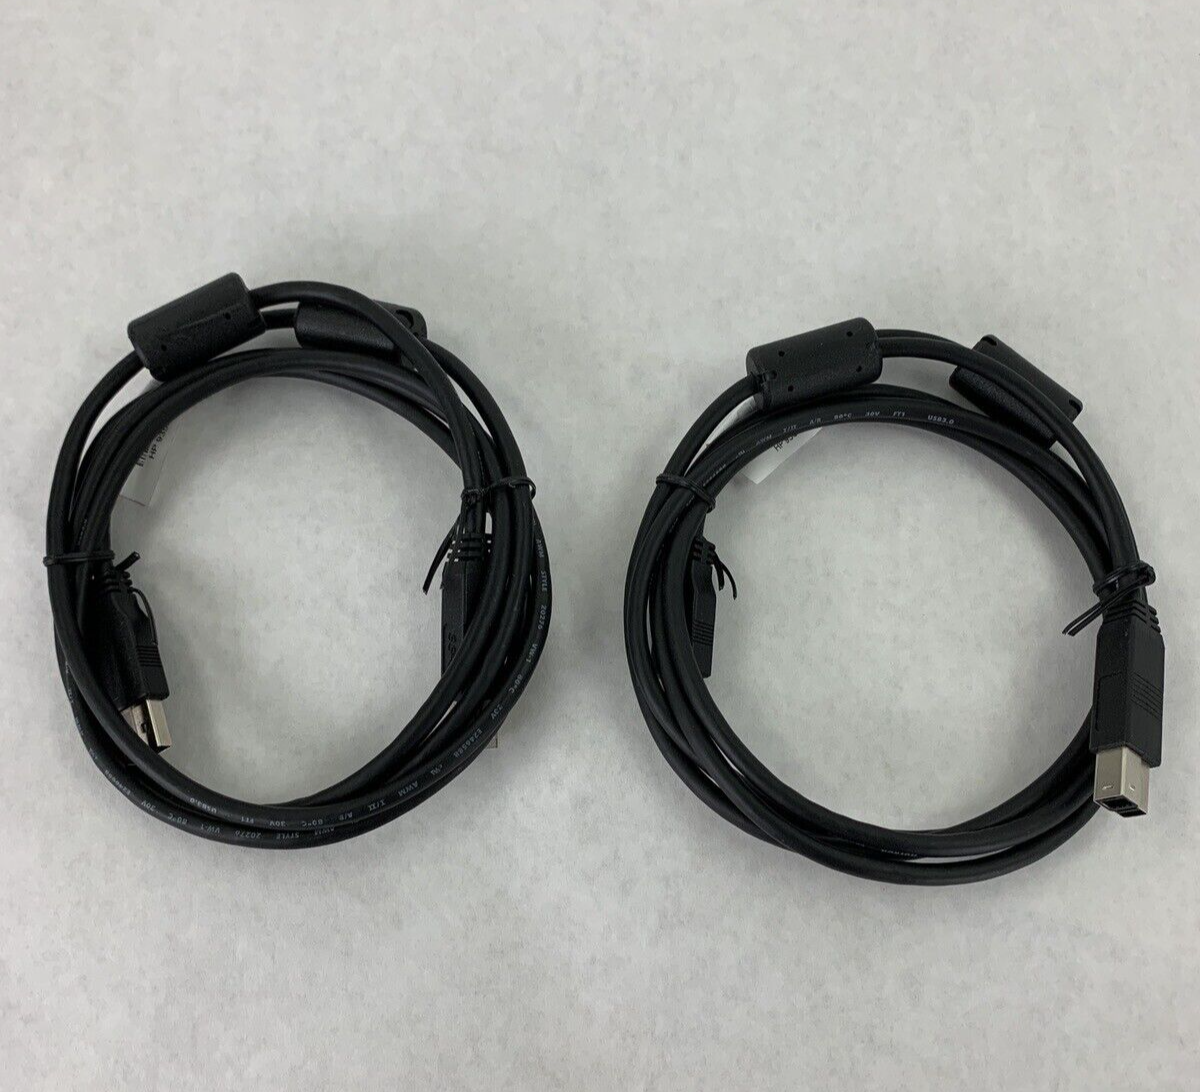 Pair of HP 935544 6ft USB 3.0 Cable USB Type-A Type-B 935544-0012209